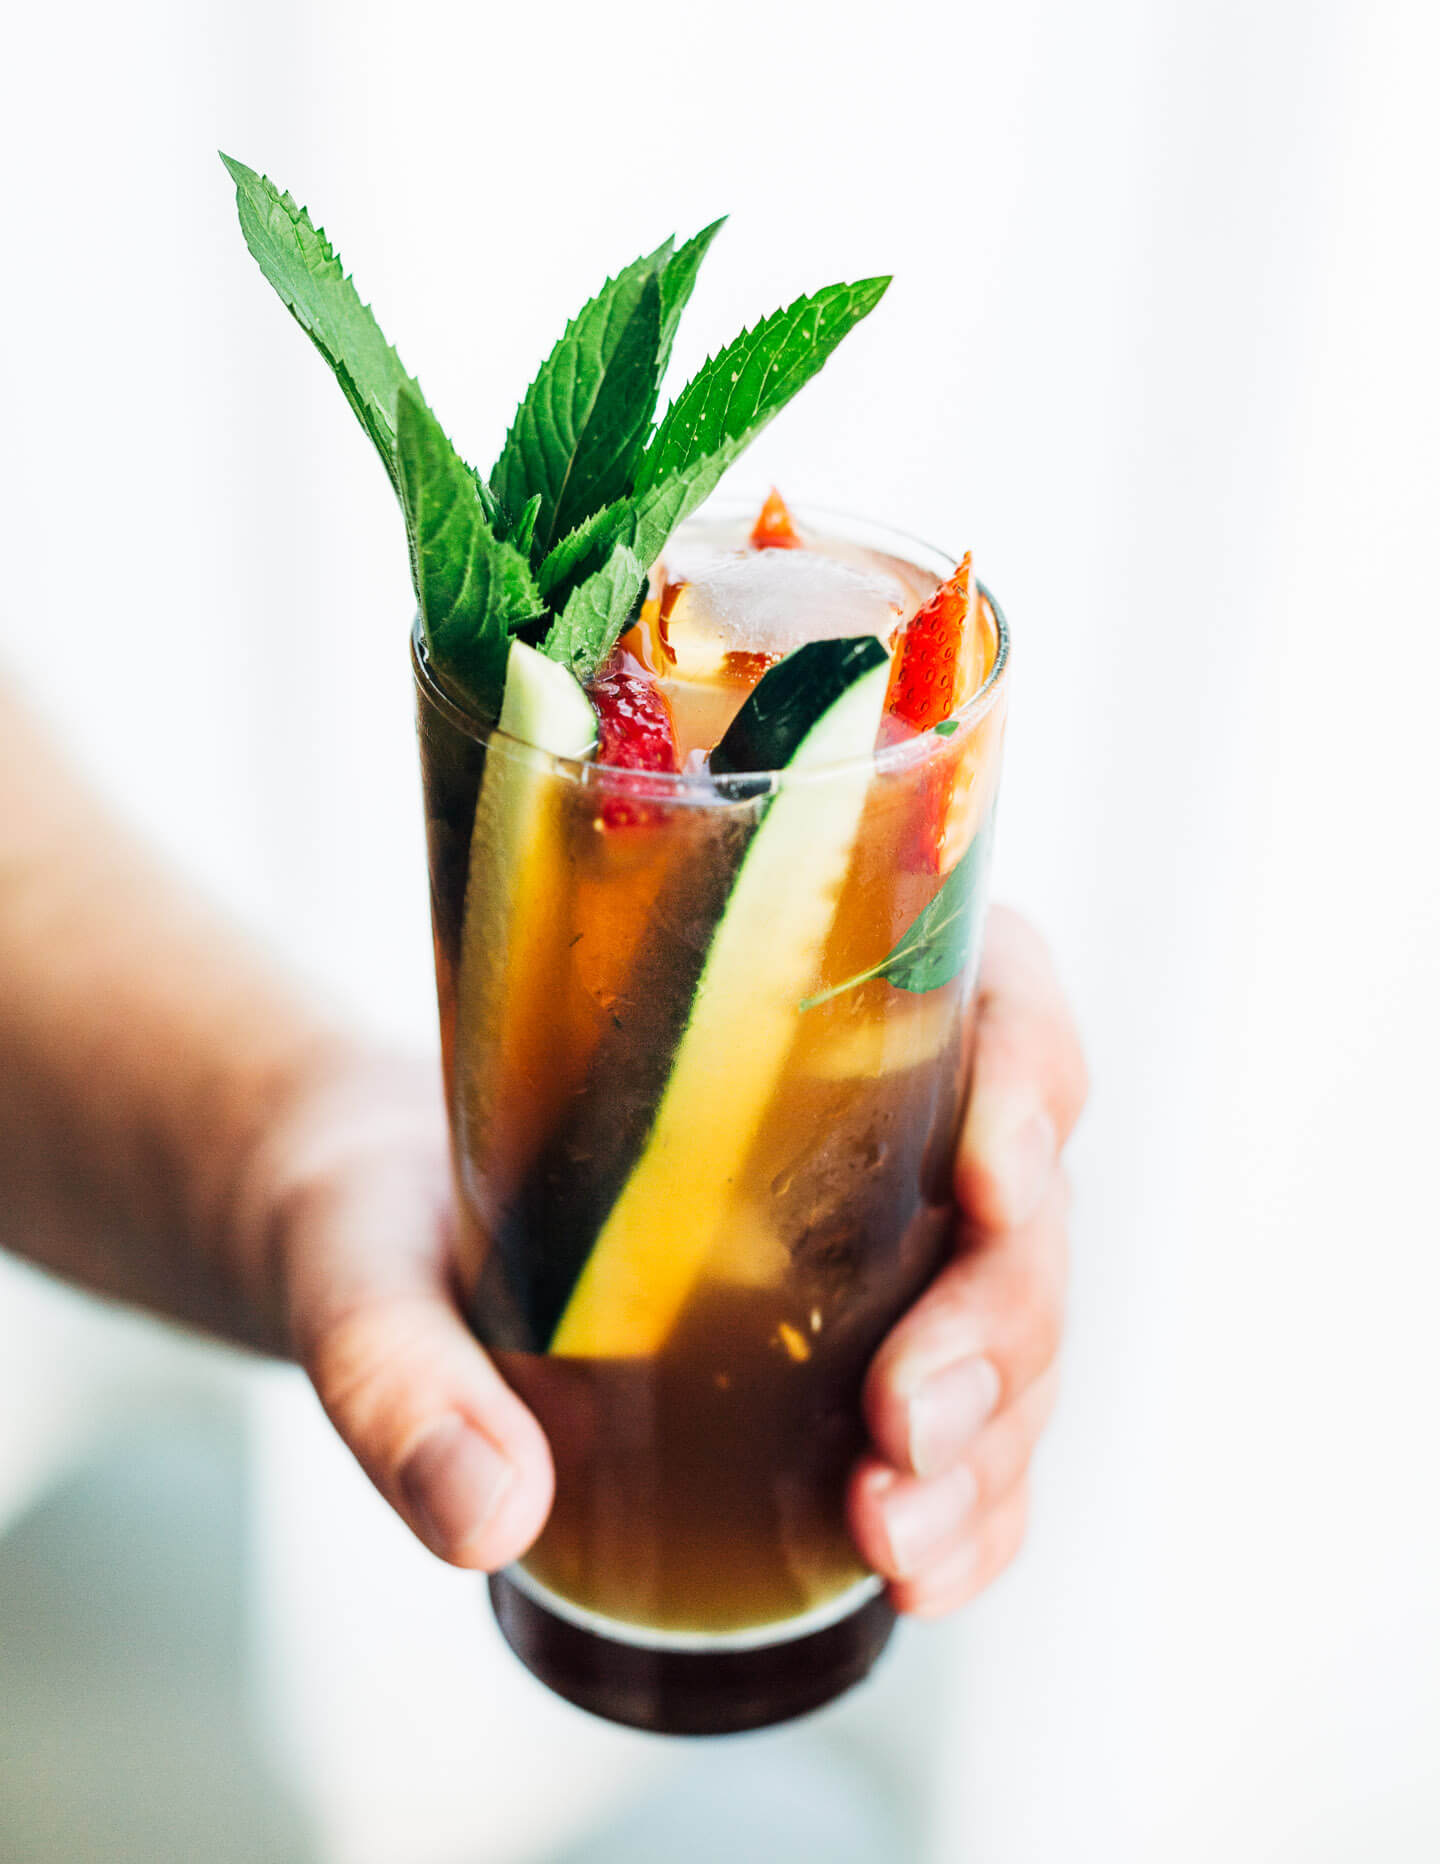 A Pimm’s cup cocktail for summer evenings. 